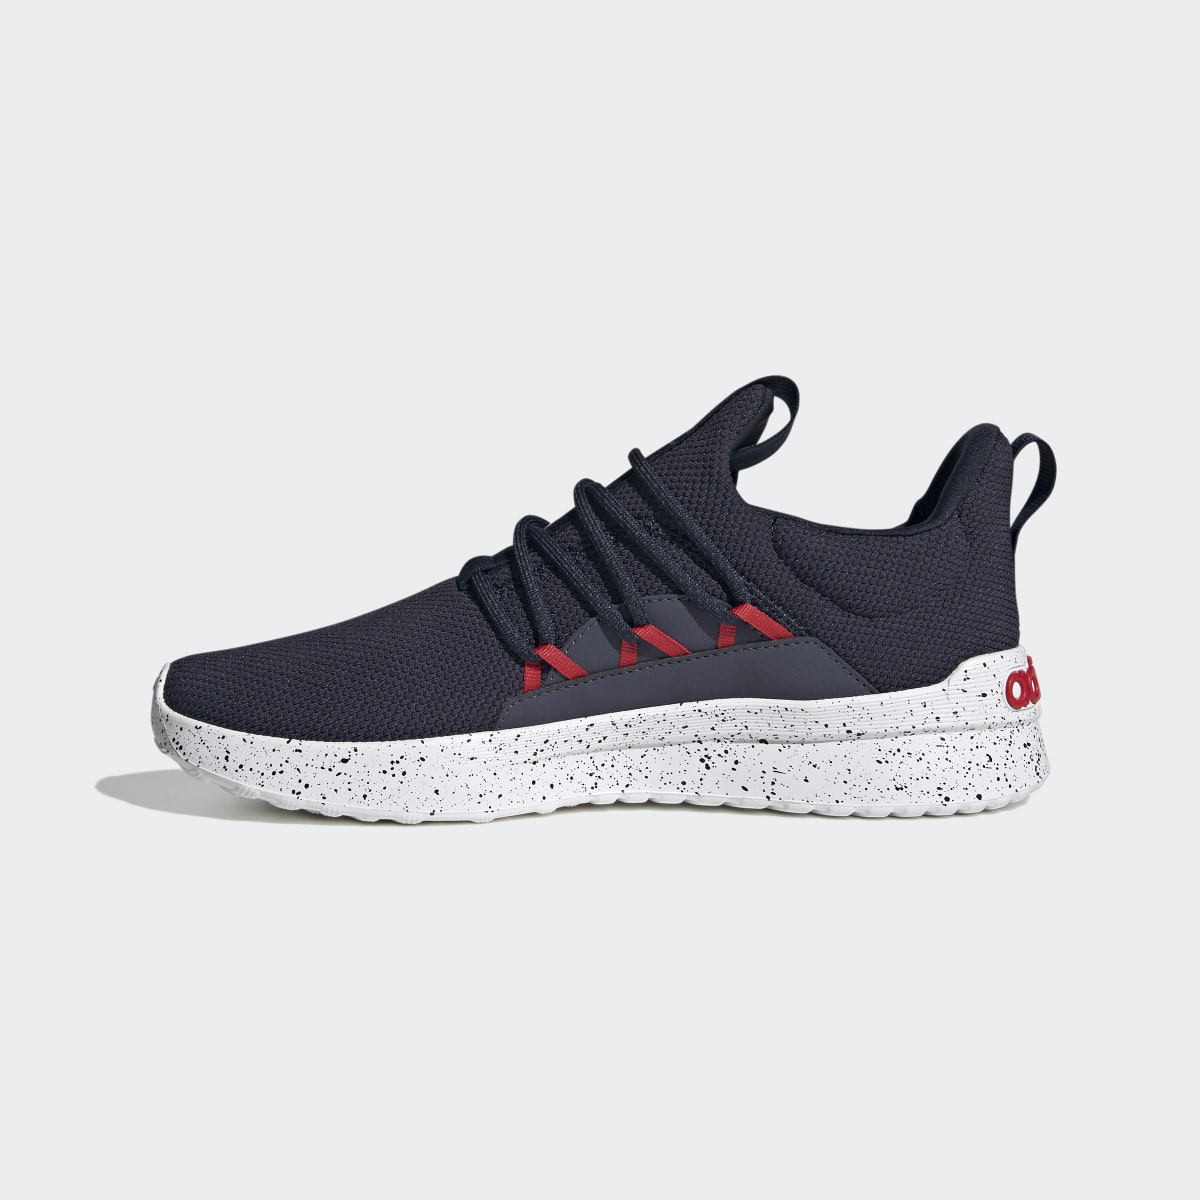 Adidas Lite Racer Adapt 5.0 Shoes. 7